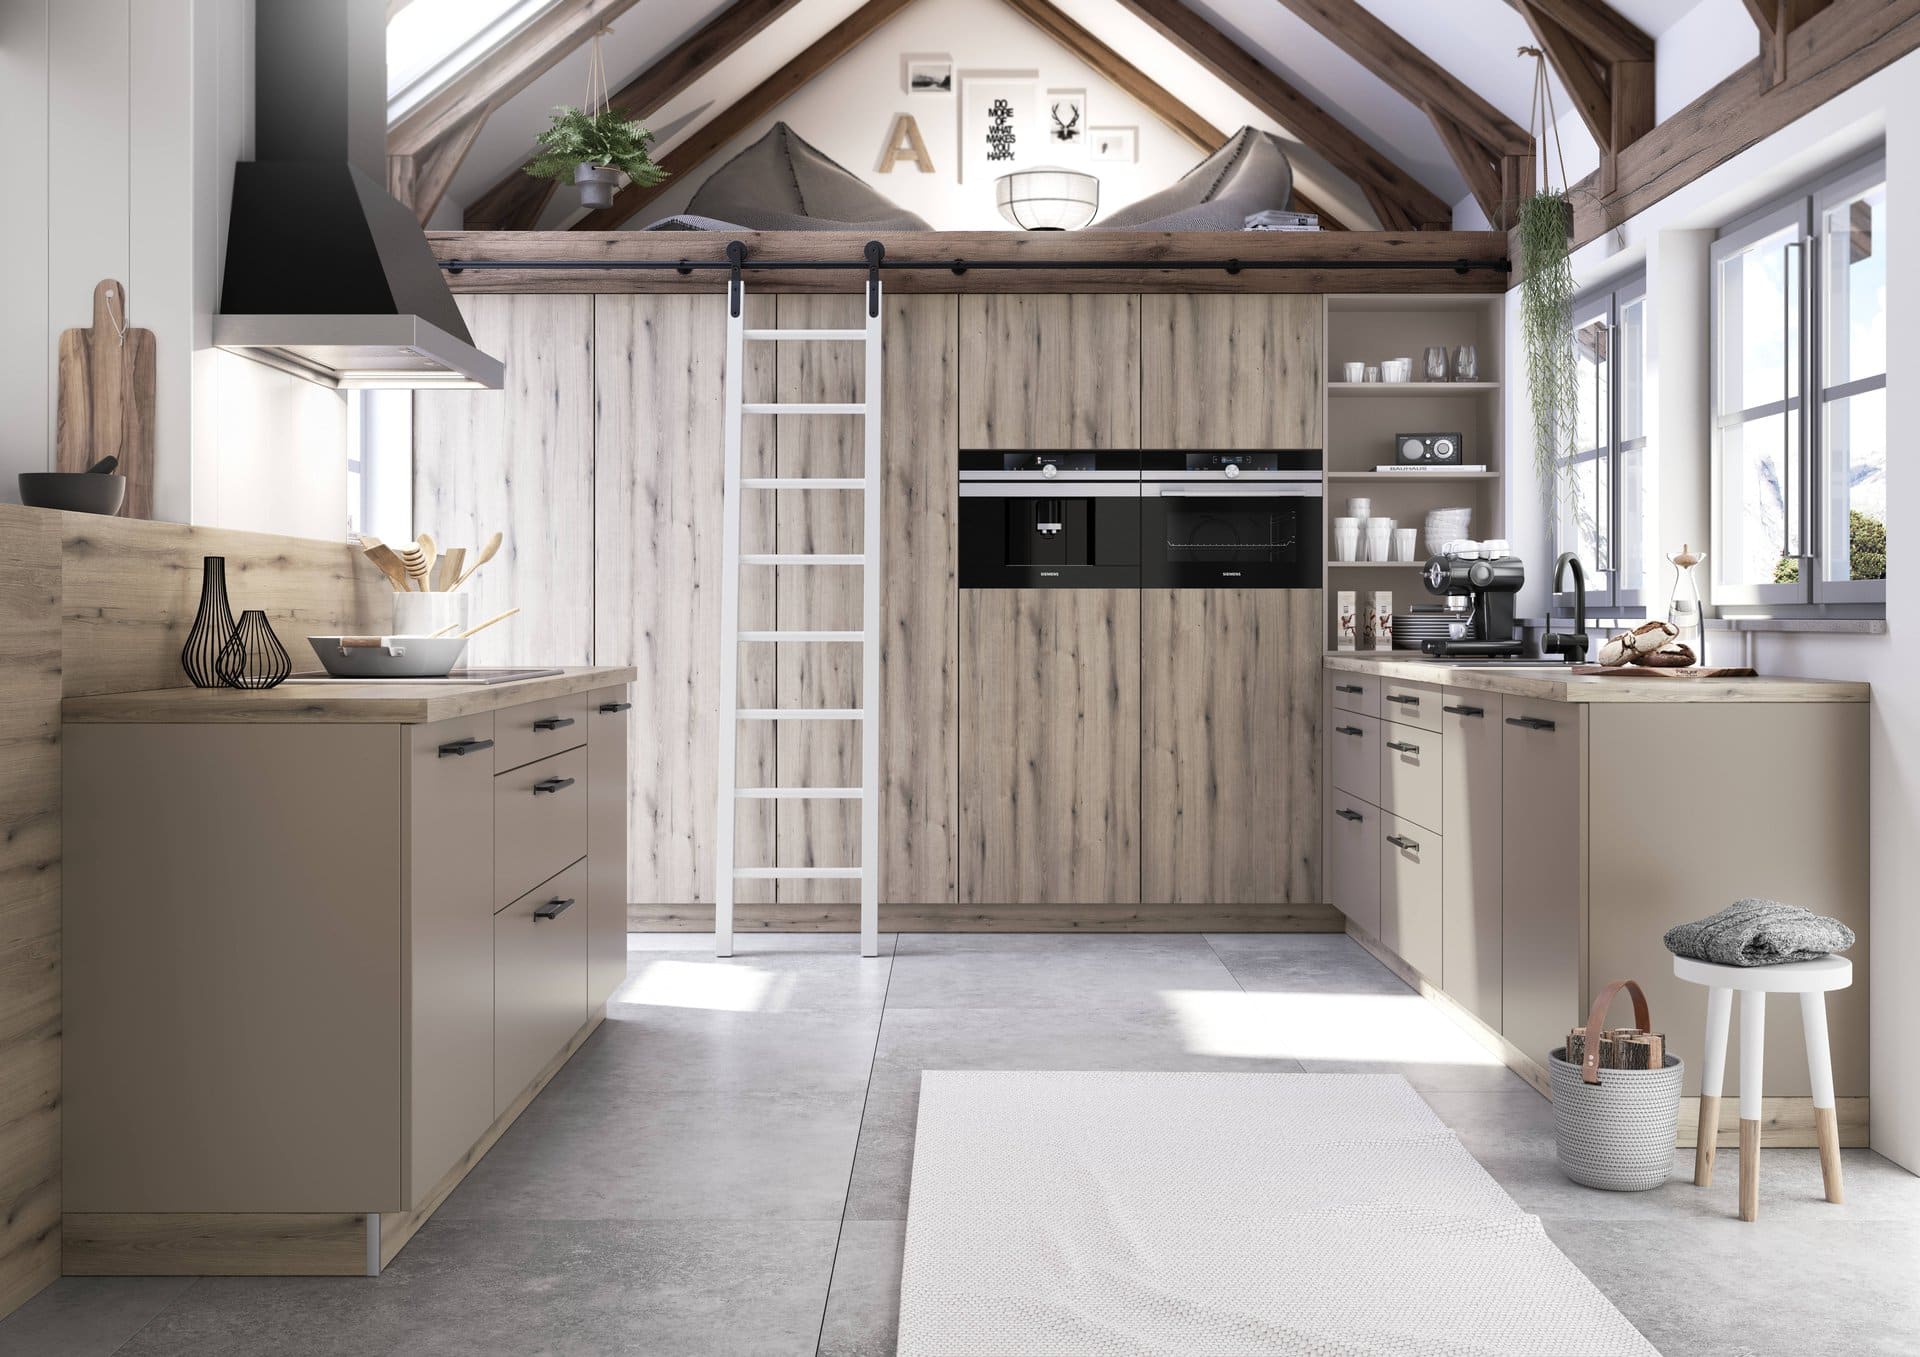 Modern rustic kitchen with natural light, featuring wooden beams, light wood cabinetry from the Bauformat Melamine series, and integrated appliances.